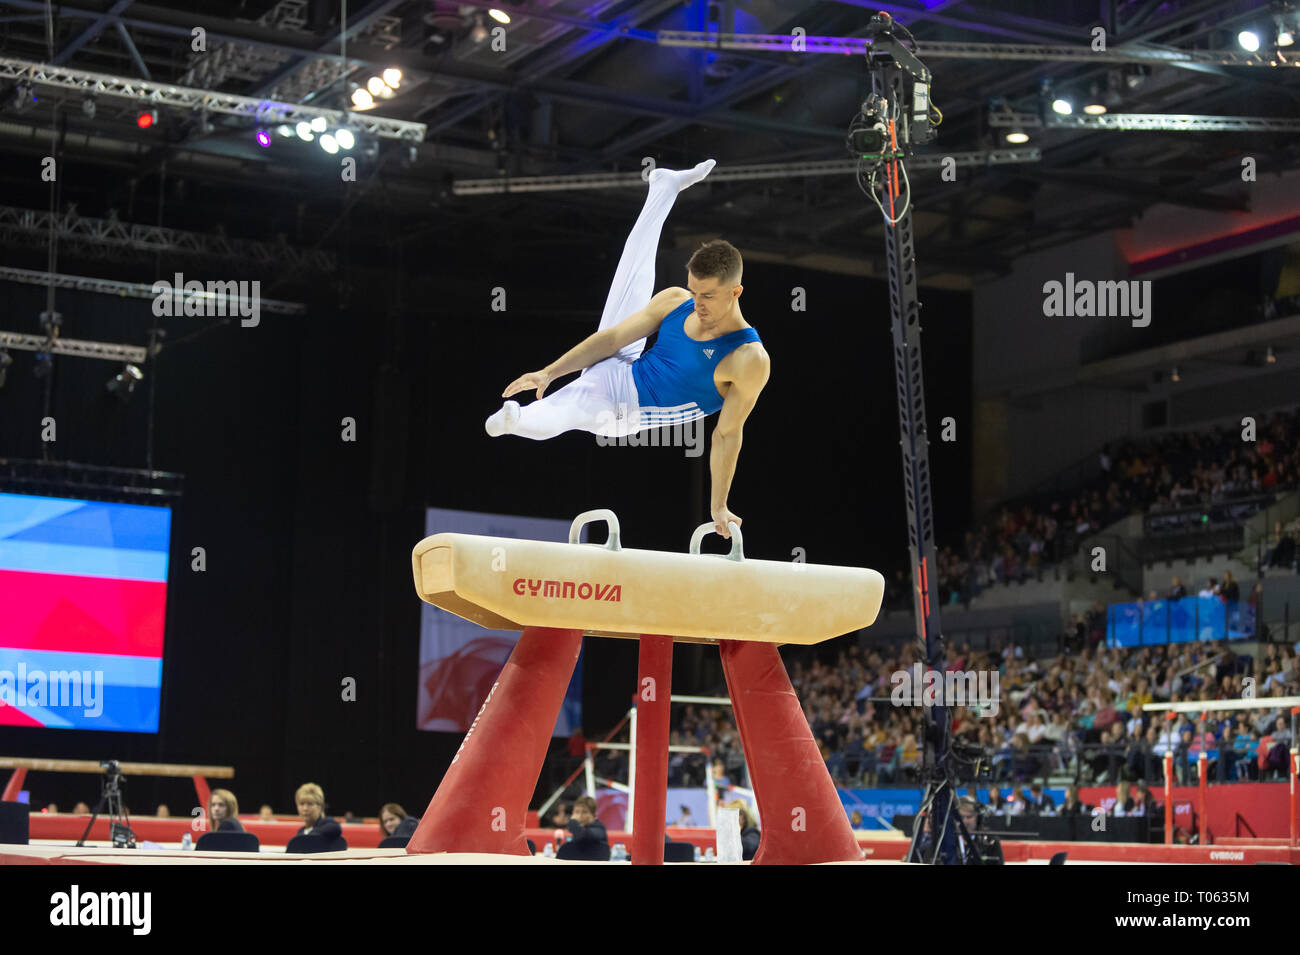 Liverpool, UK. 17th March 2019. Pommel Horse Gold medalist Max Whitlock, MBE of South Essex Gymnastics competing at the Men’s and Women’s Artistic British Championships 2019, M&S Bank Arena, Liverpool, UK. Credit: Iain Scott Photography/Alamy Live News Stock Photo